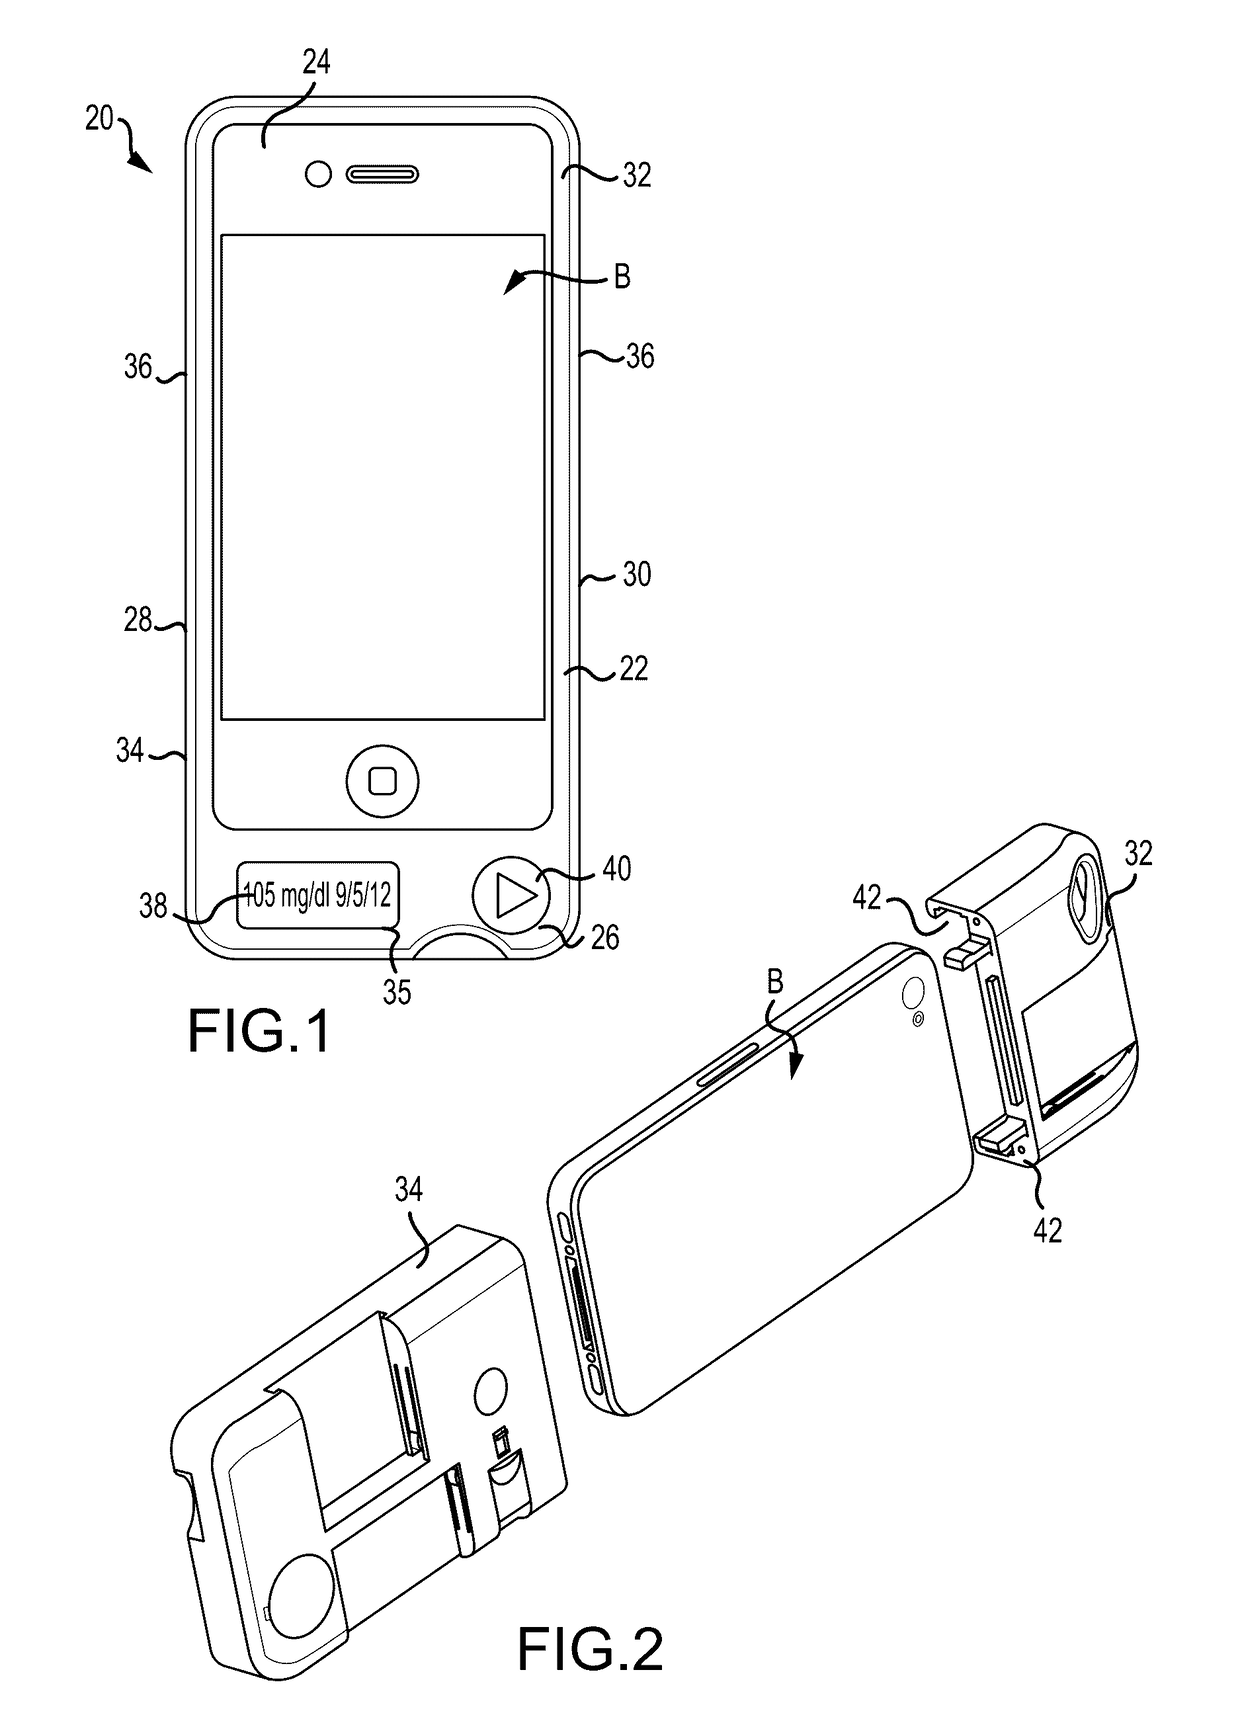 Glucose monitoring device in a protective smartphone case